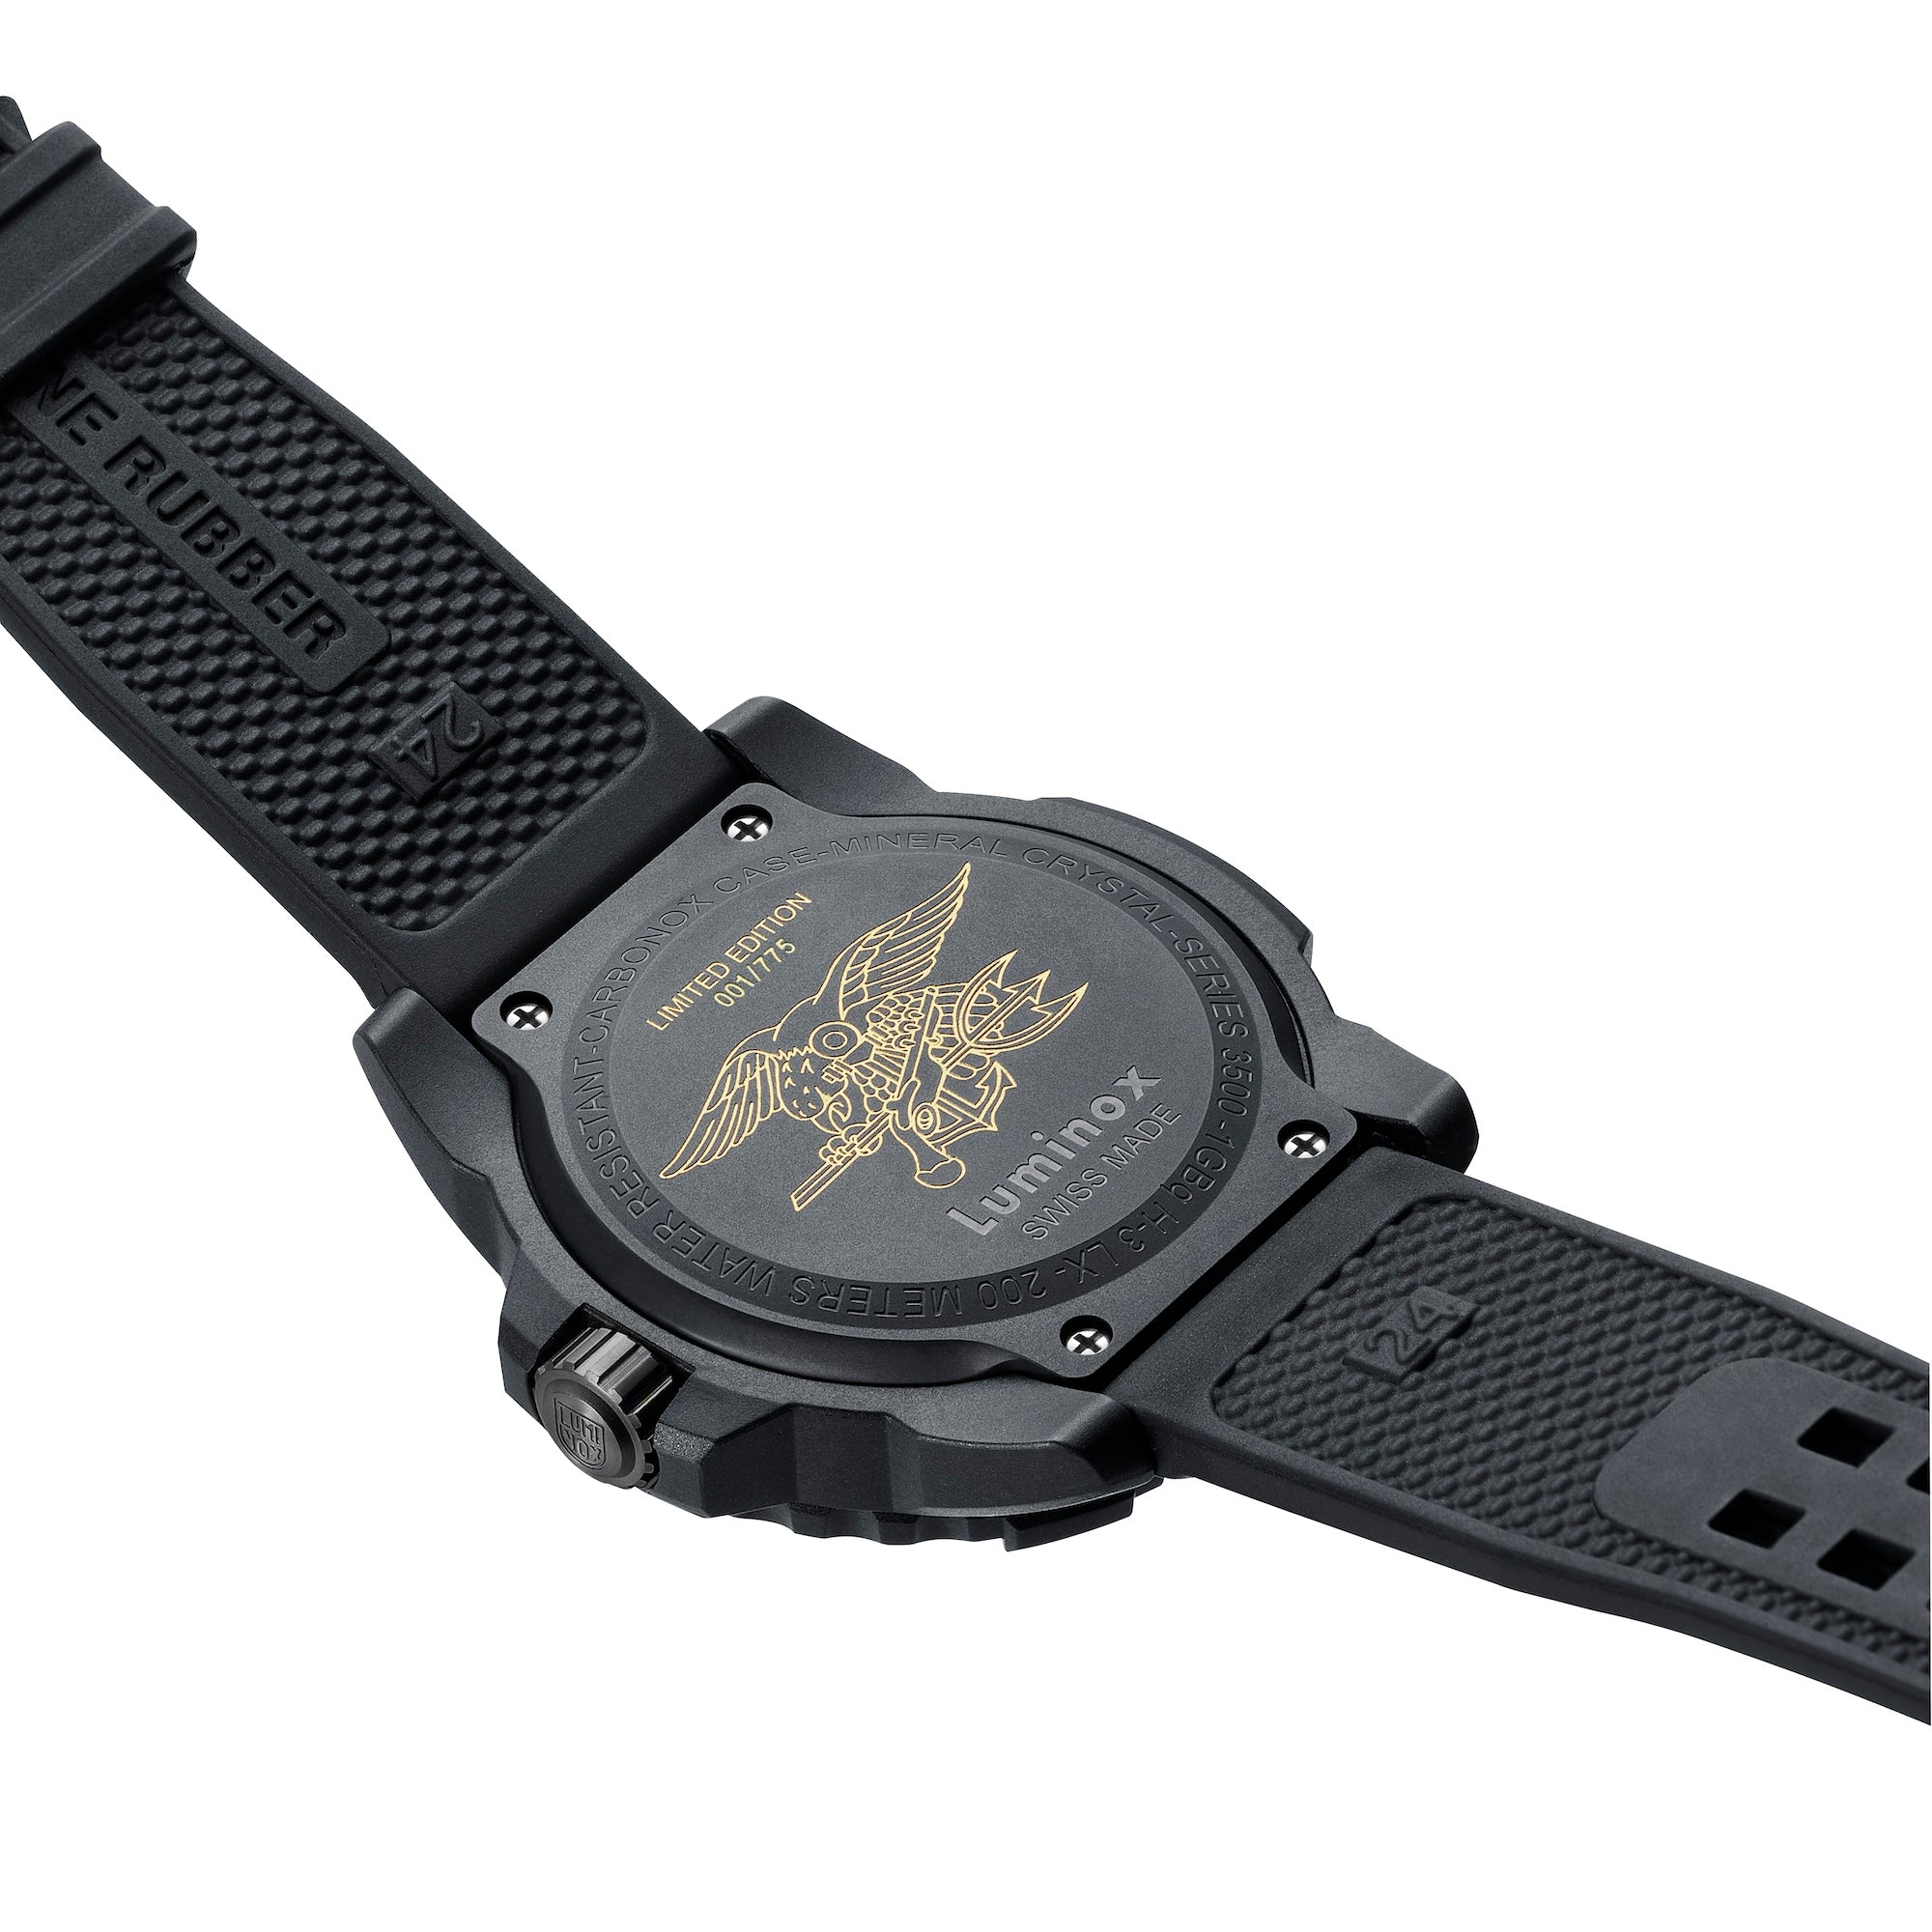 Luminox Limited Edition Navy Seal Series All In All The Time 3501.BO.AL